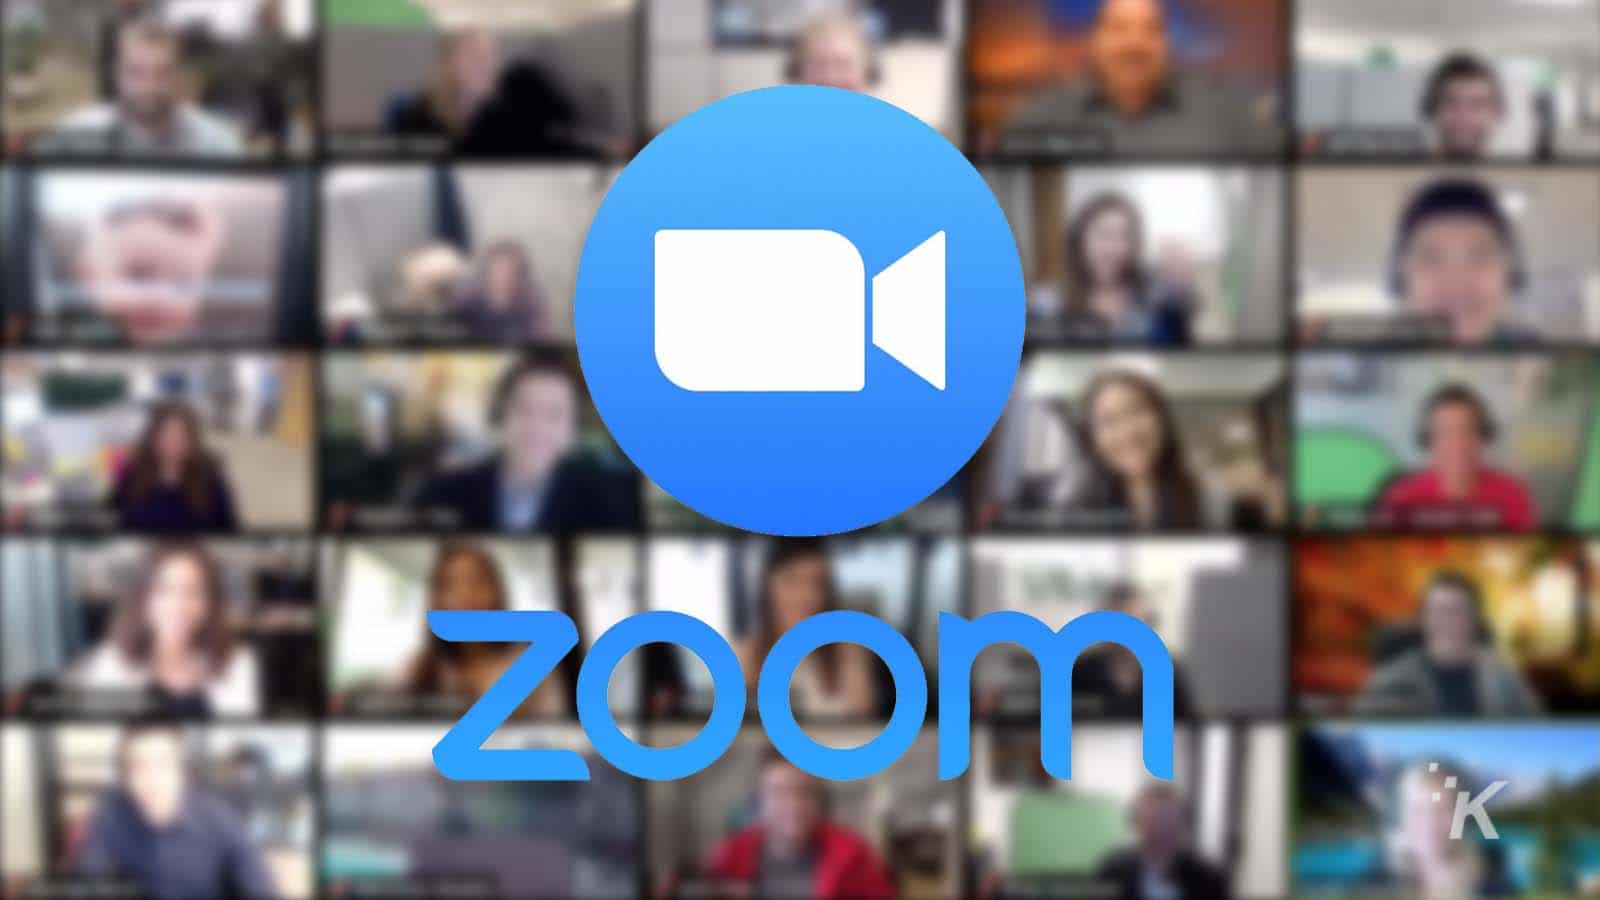 Zoom will pay $25 back to some users as a part of their class-action settlement